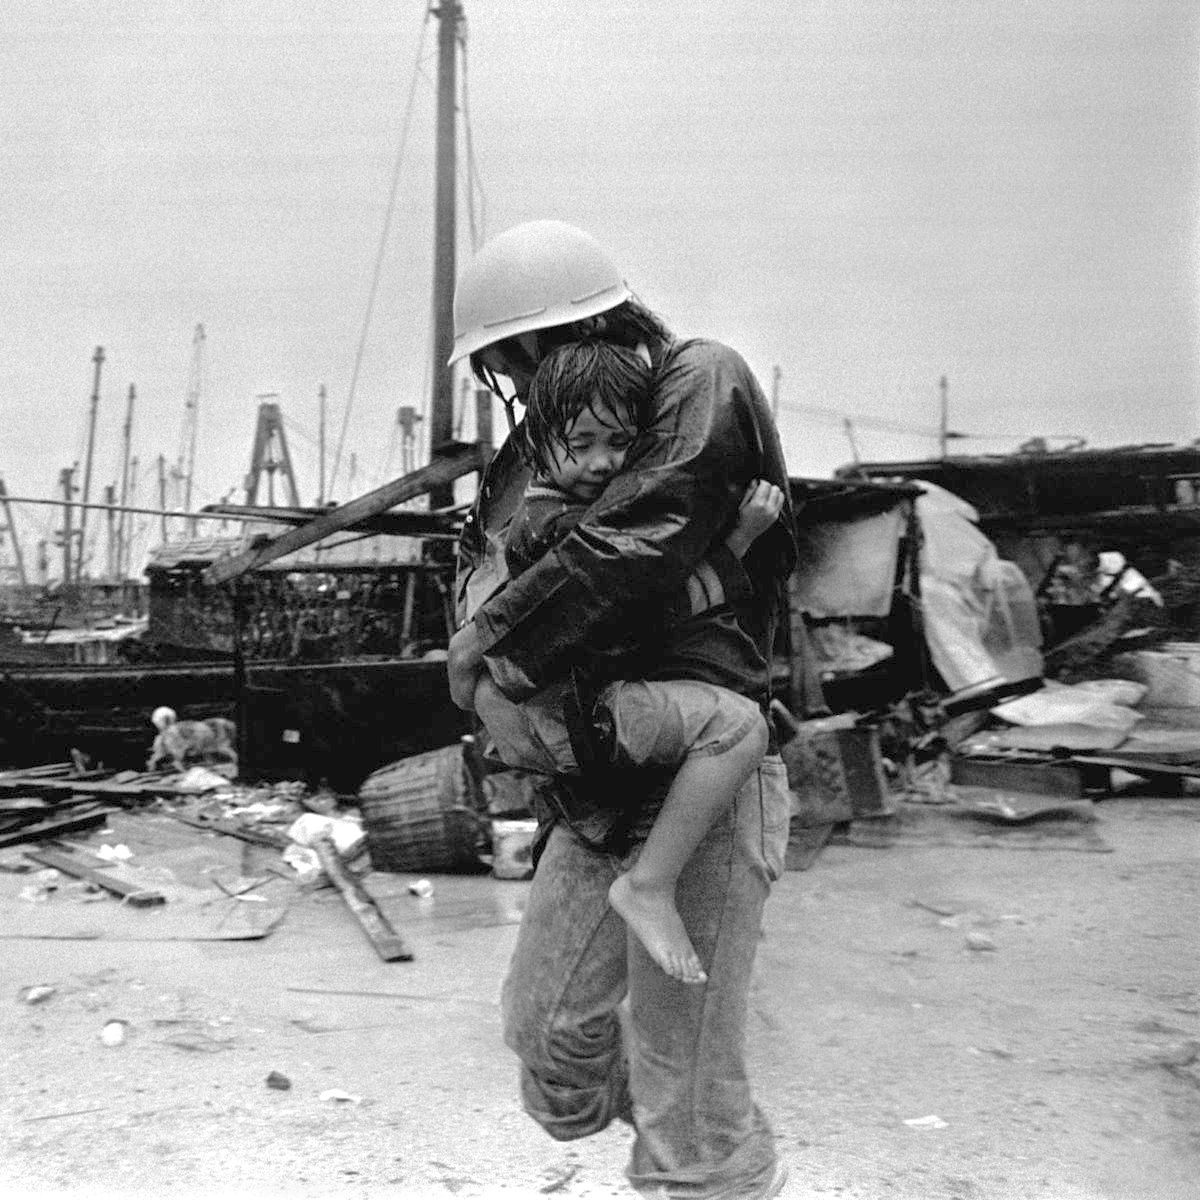 A rescuer carries a young survivor past the debris left behind by Typhoon Hope